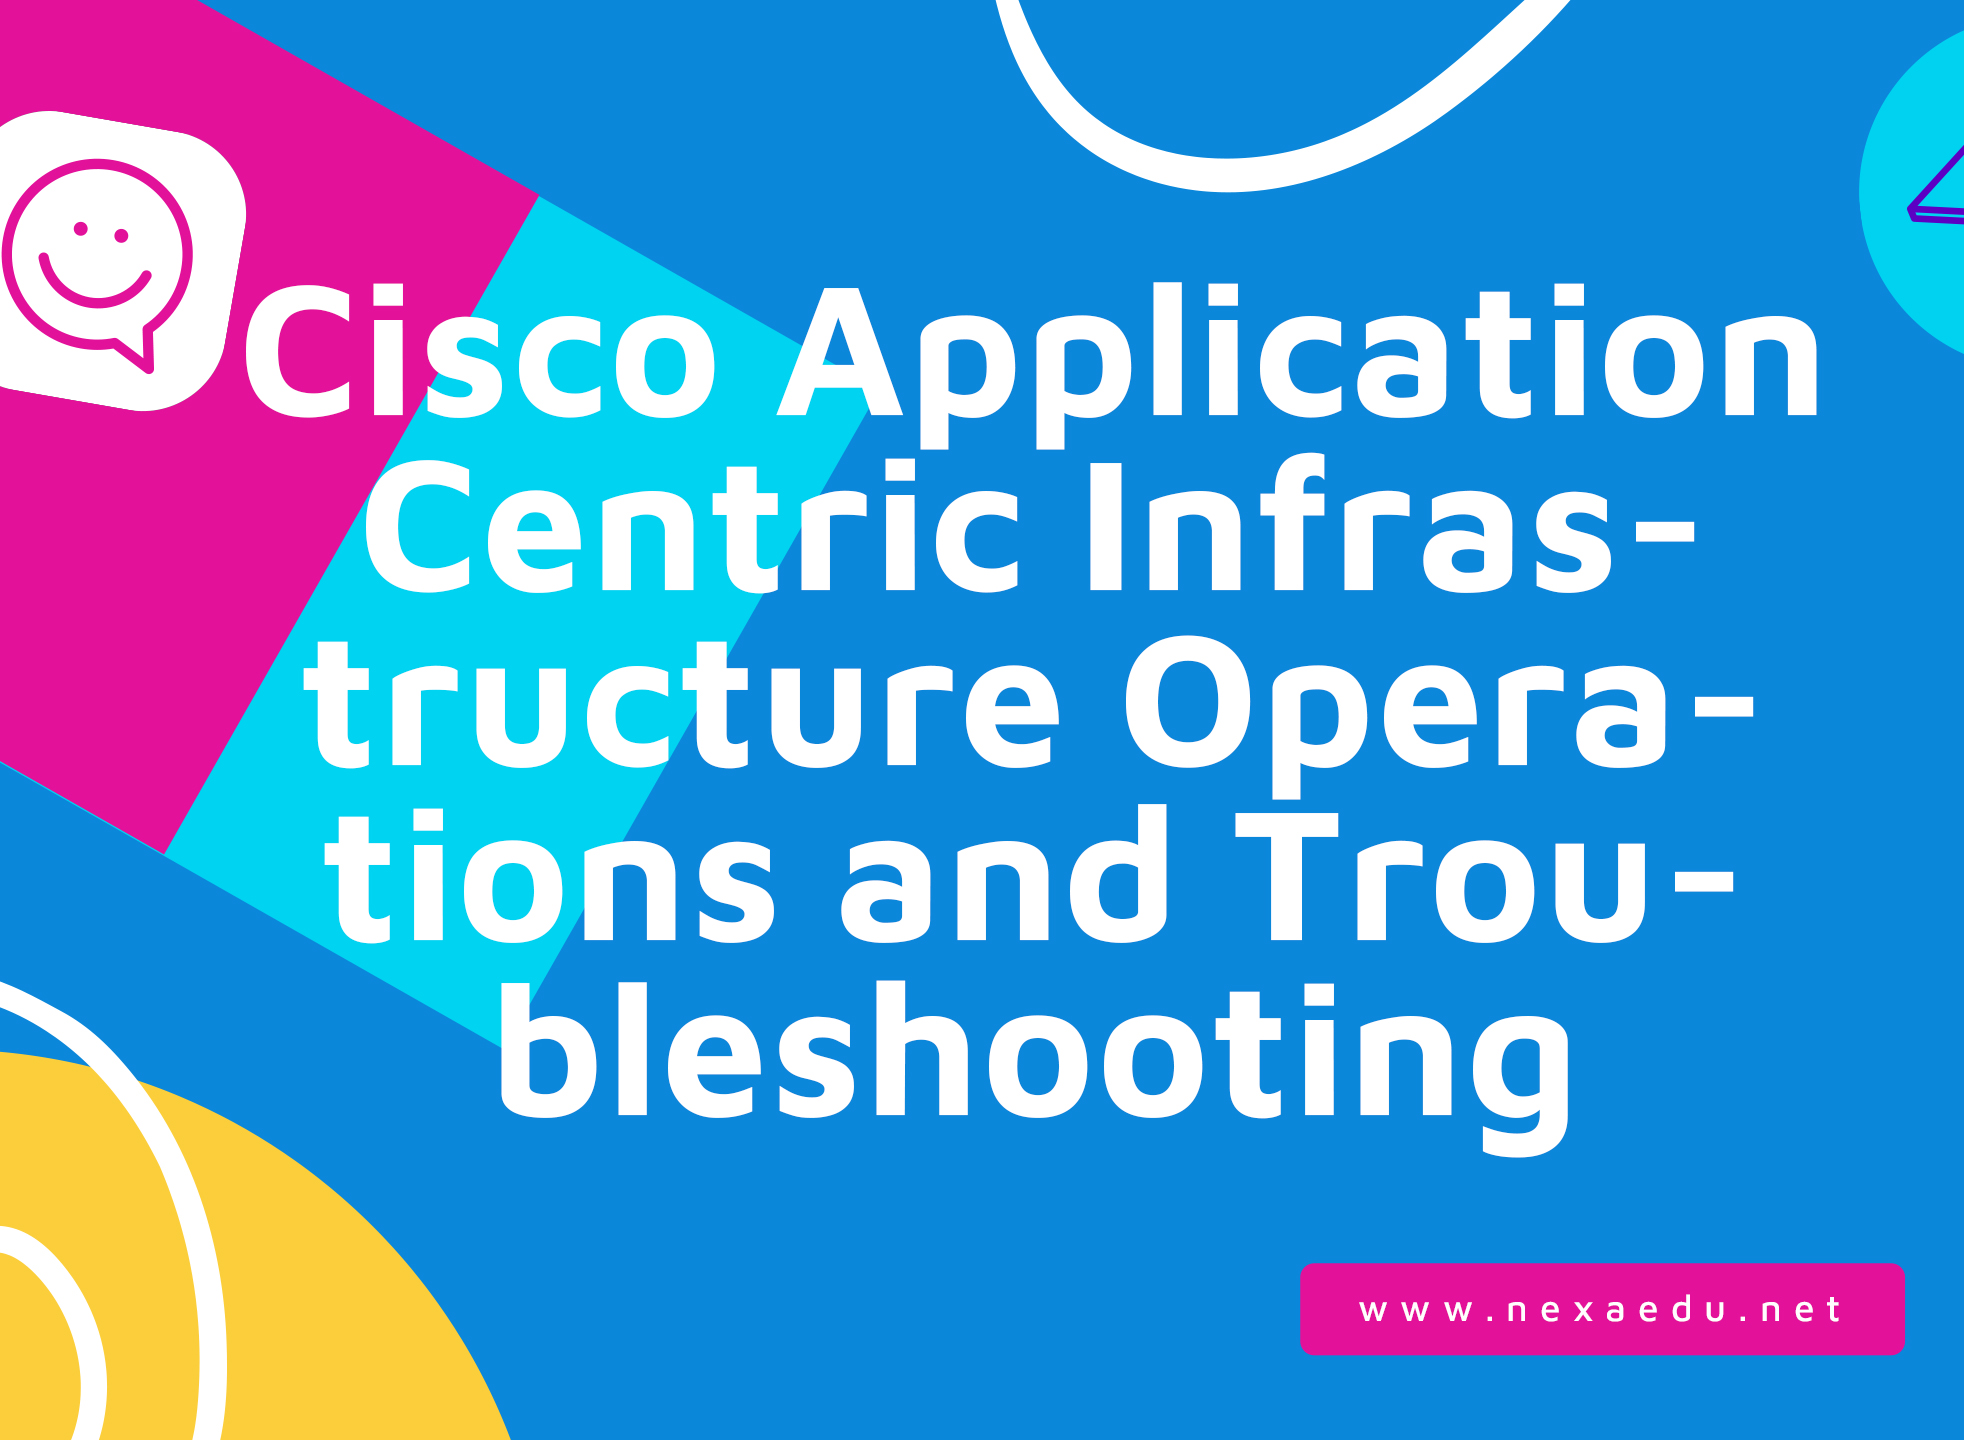 Cisco Application Centric Infrastructure Operations and Troubleshooting